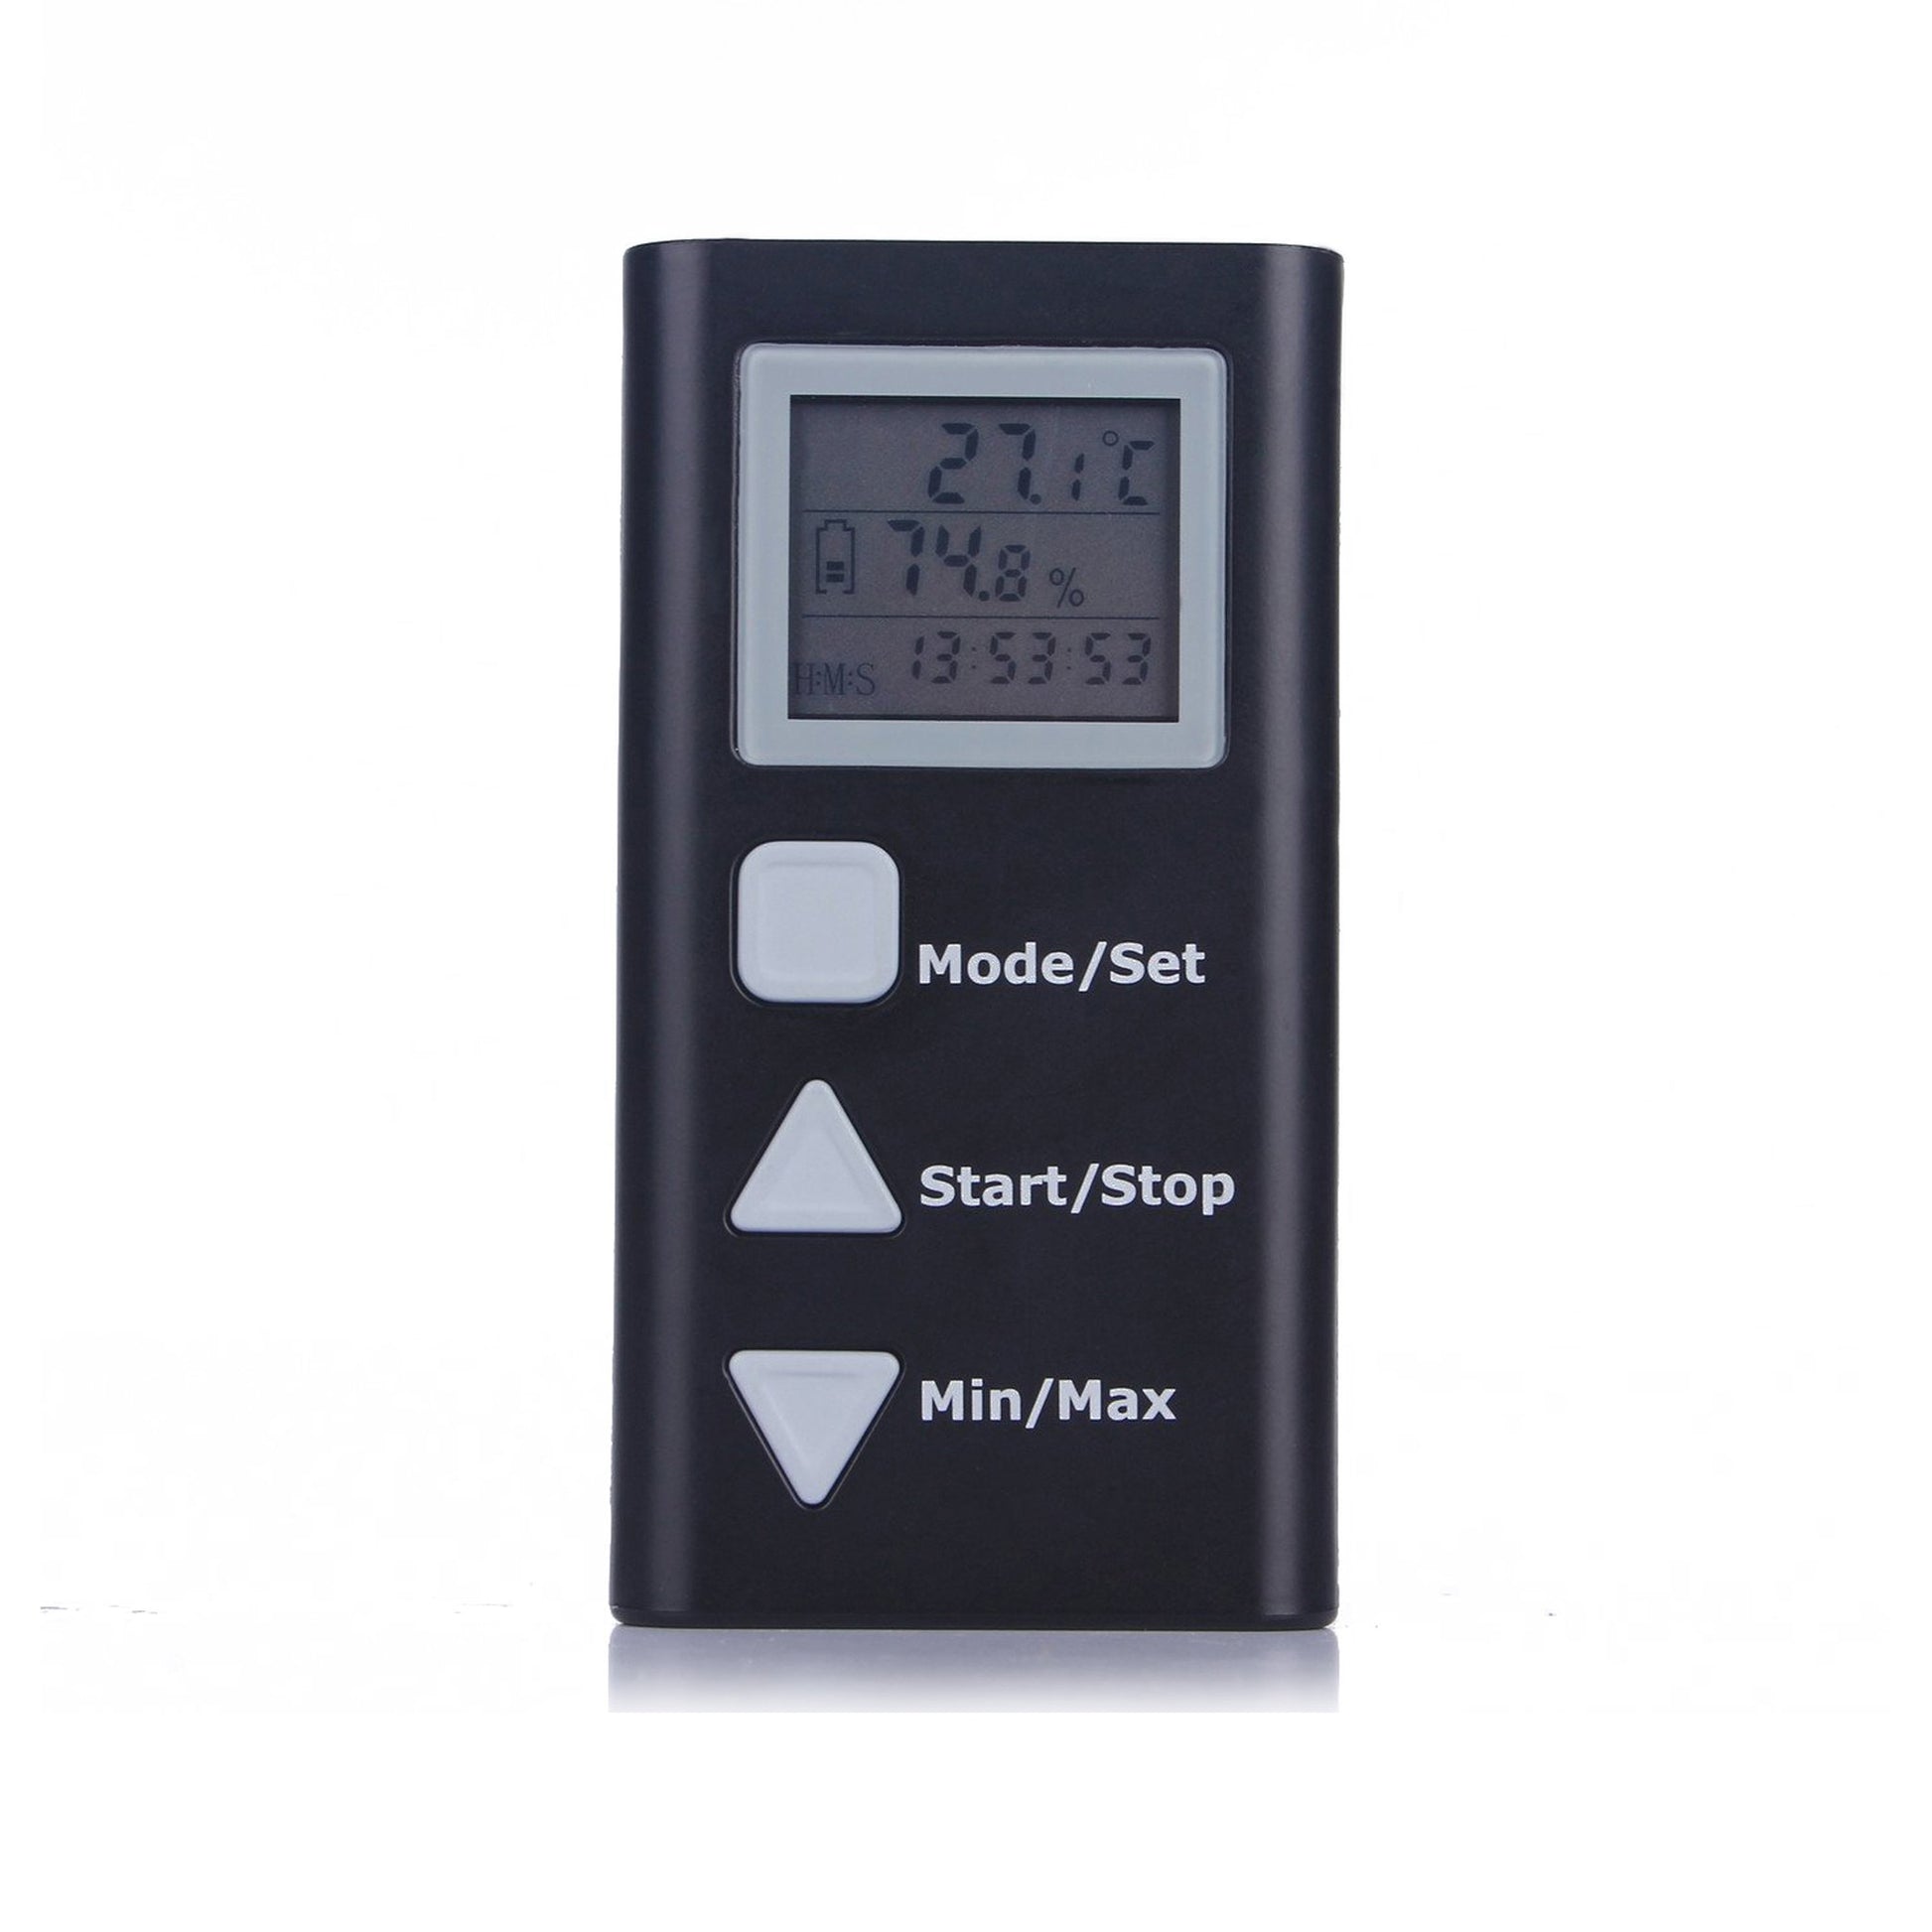 TEMPERATURE HUMIDITY DATA LOGGER unit, front view